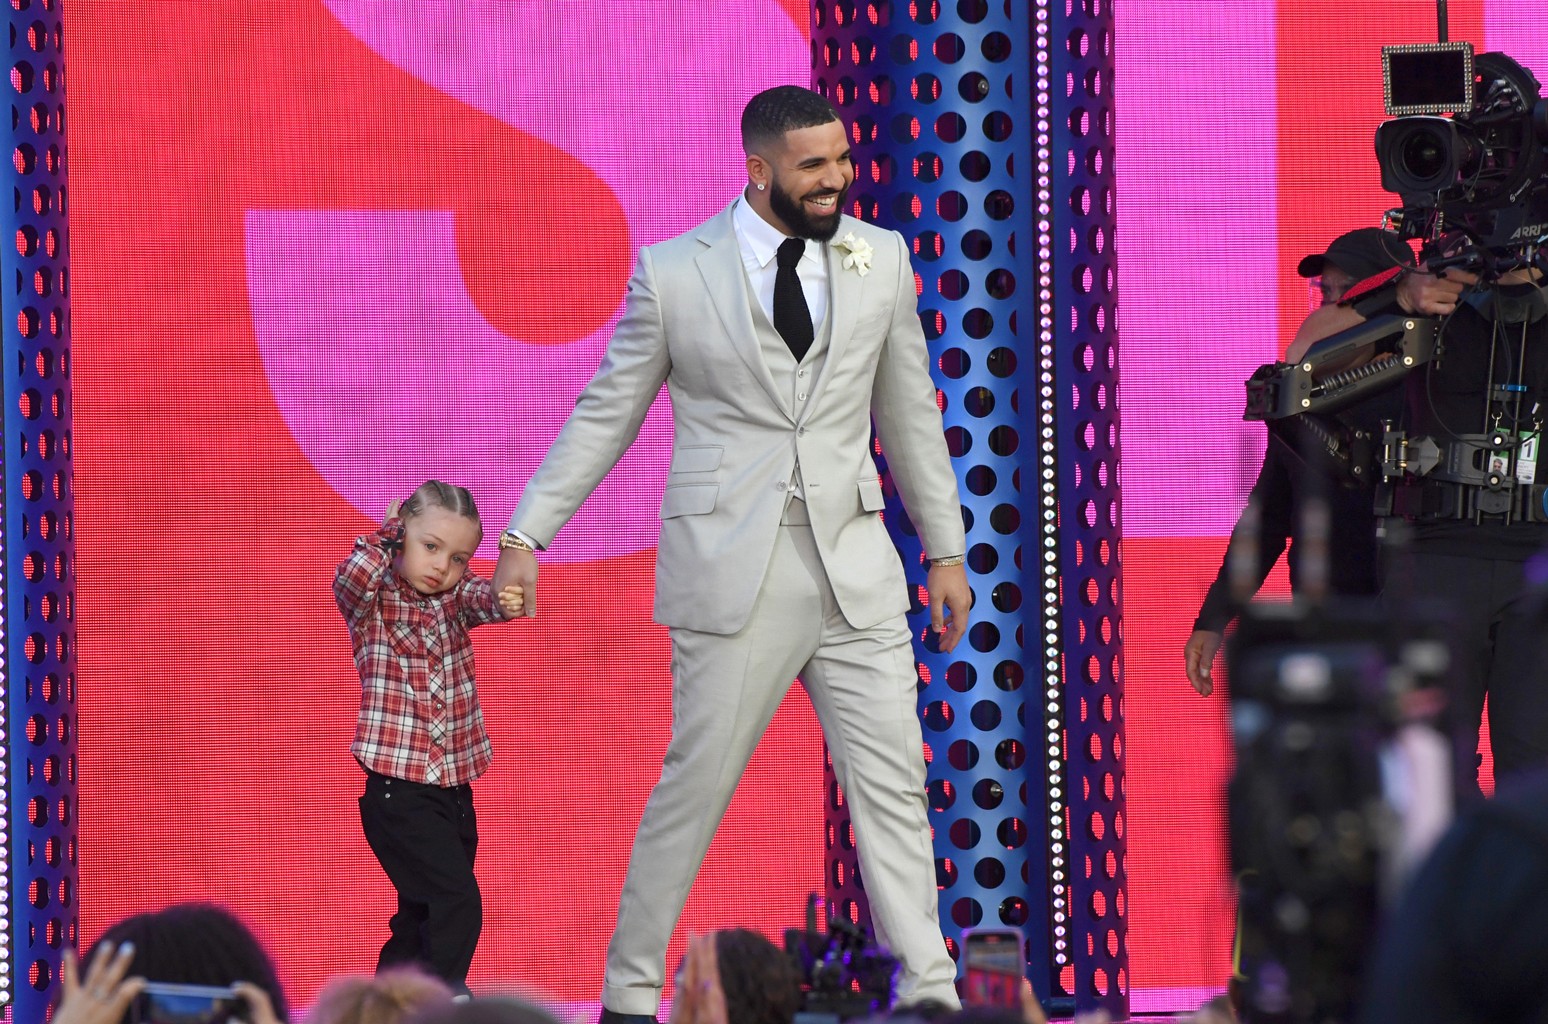 Drake came on stage with 3-year-old son, Adonis Graham.